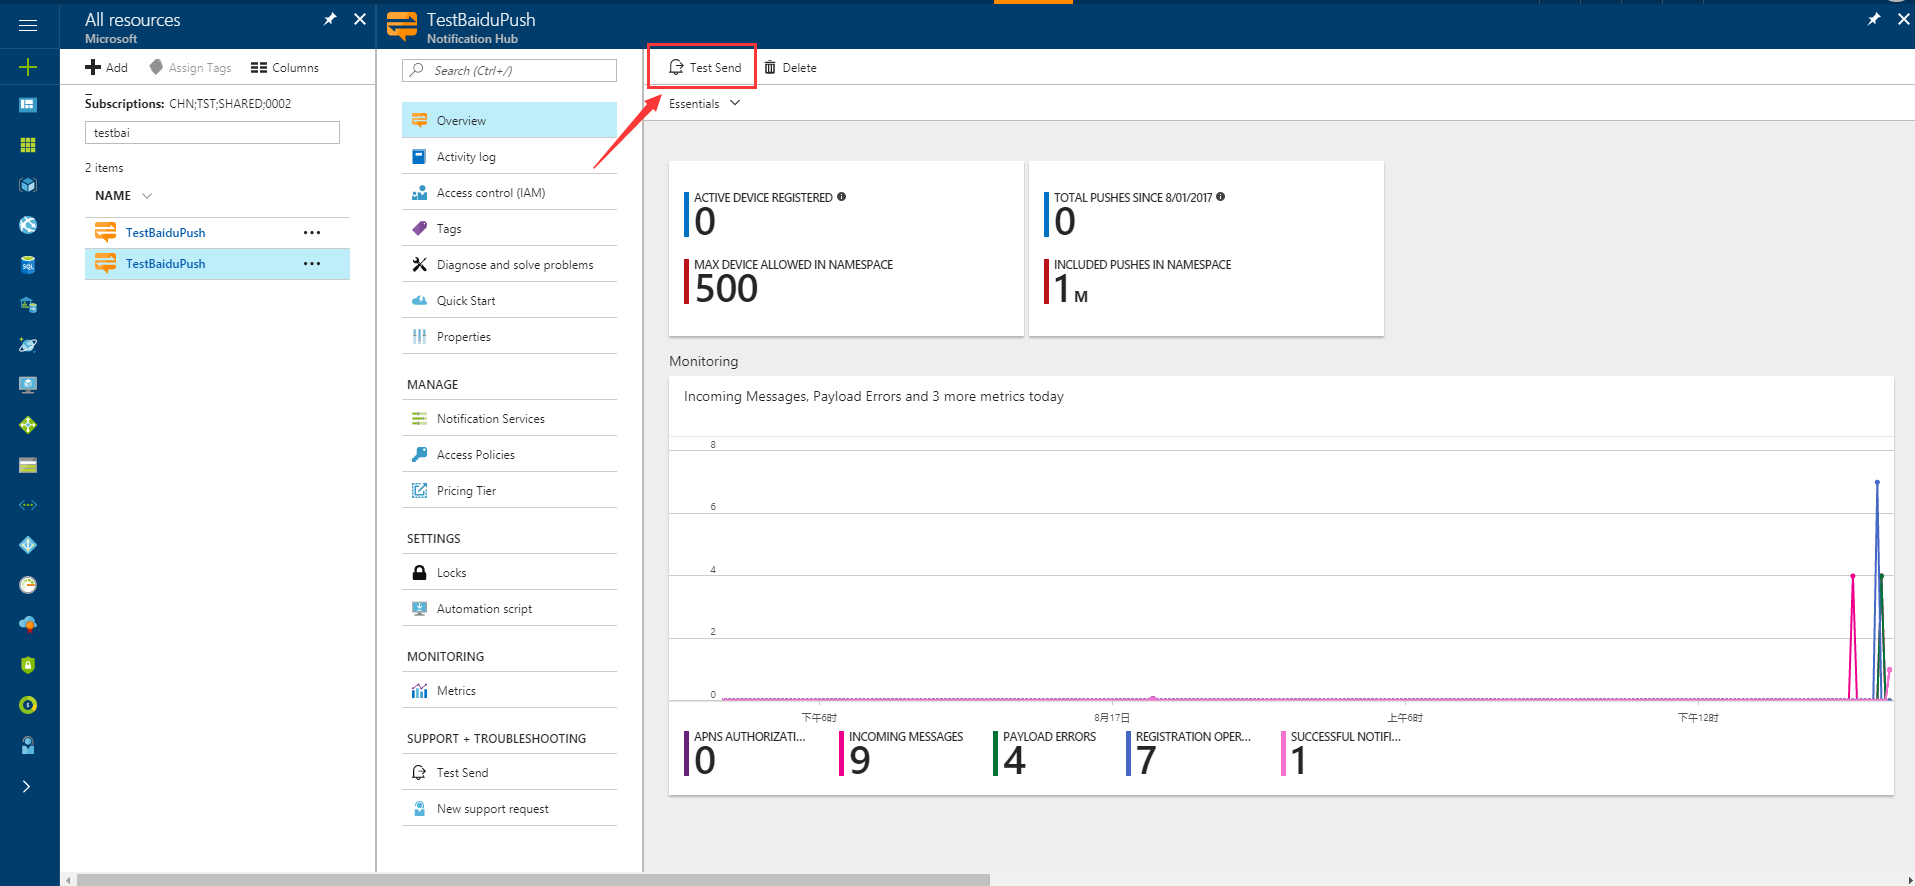 Screenshot of the Azure Portal with the Test Send option outlined in red and a red arrow pointing to it.